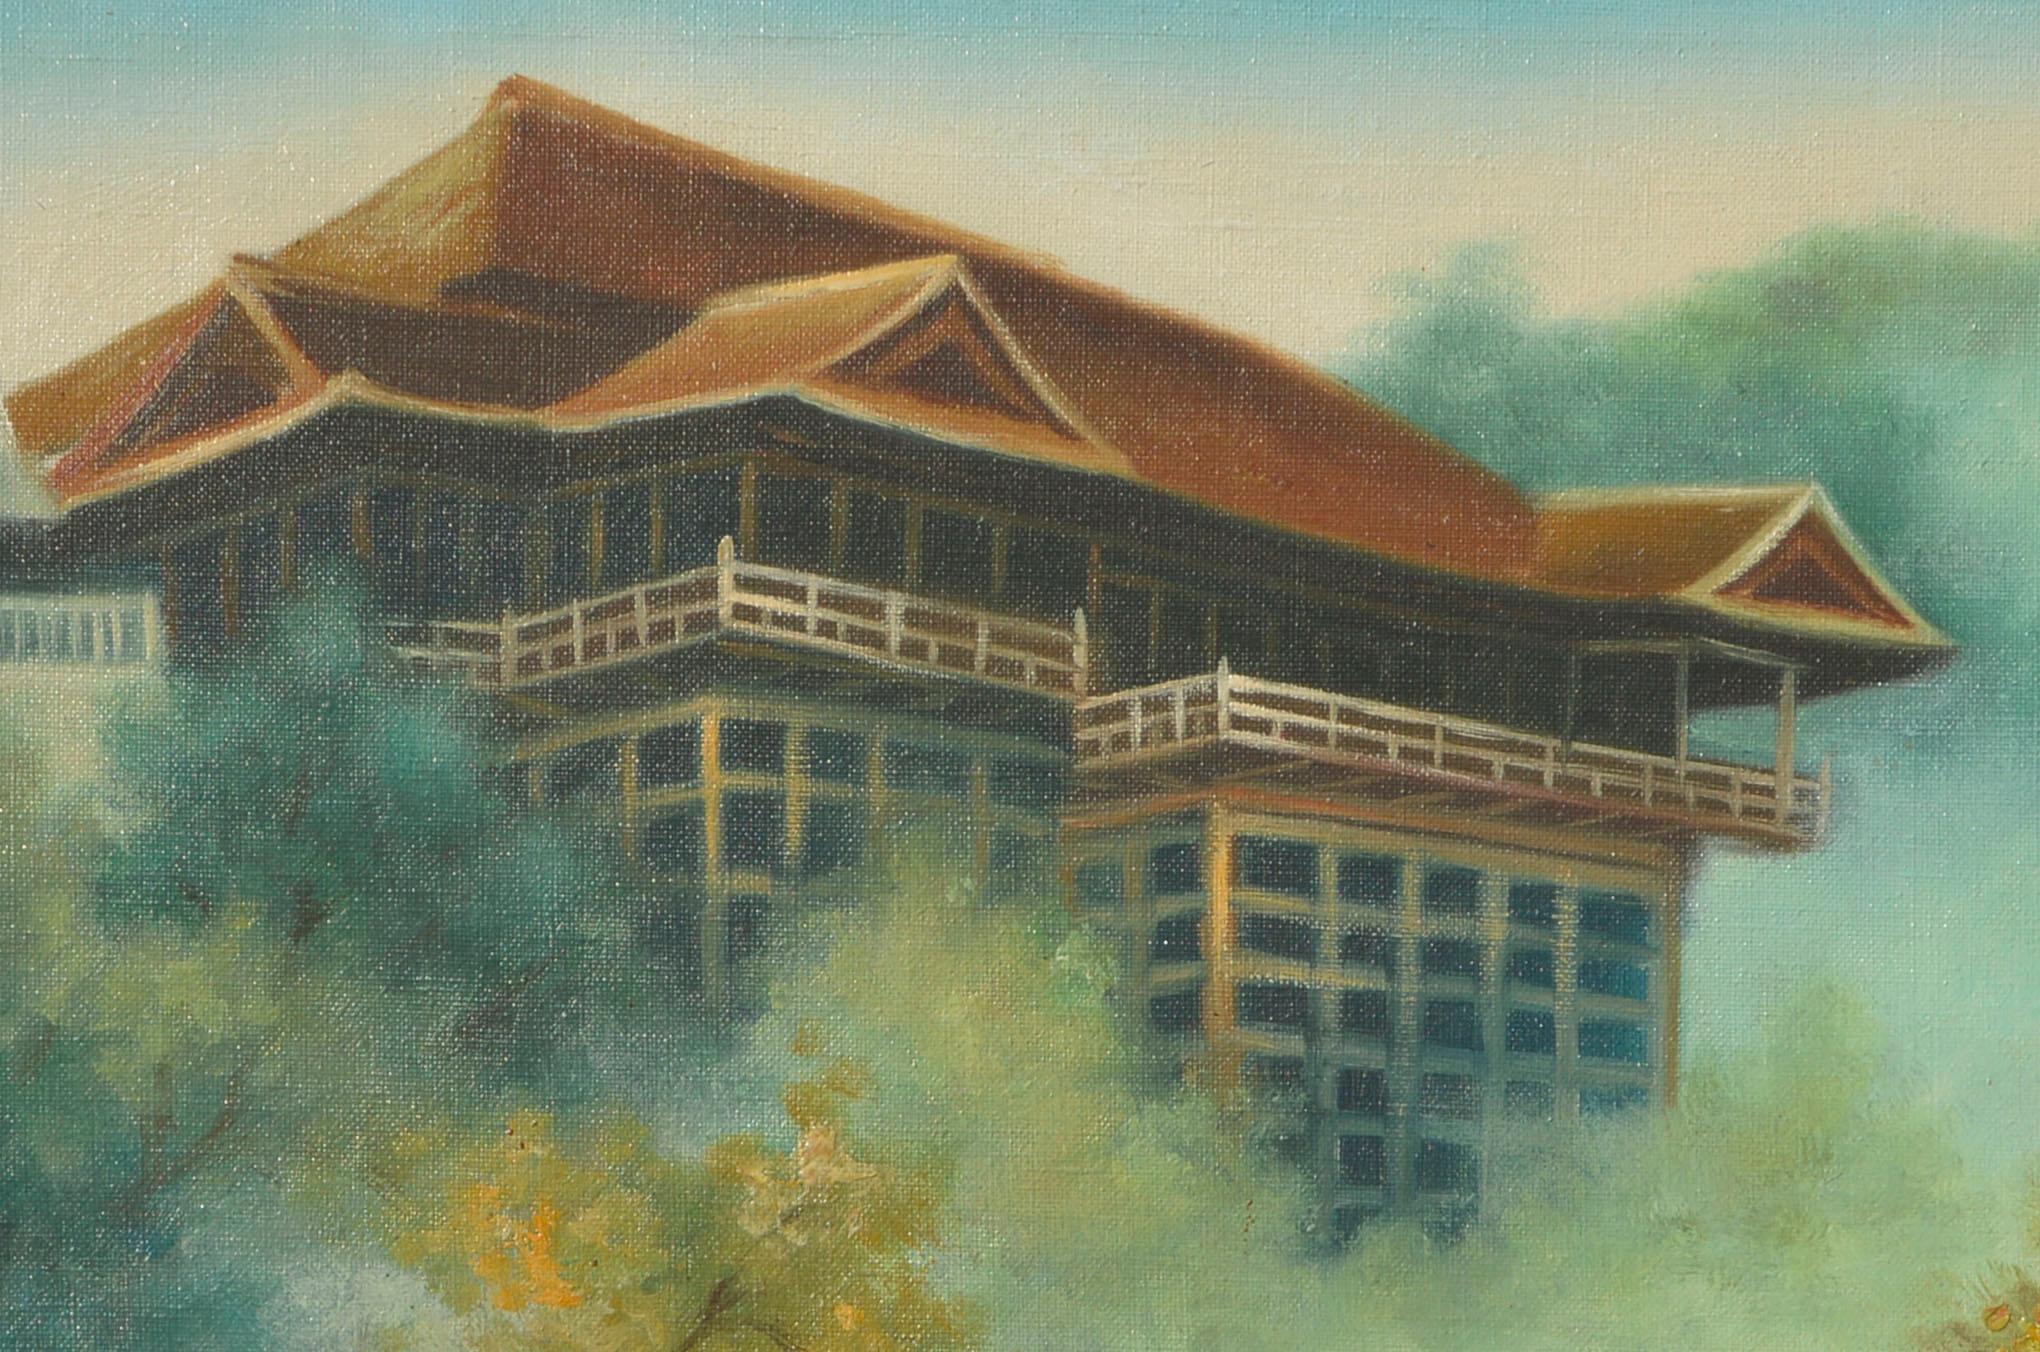 Japanese Tea House in the Mist - Mid Century Landscape - Painting by Unknown